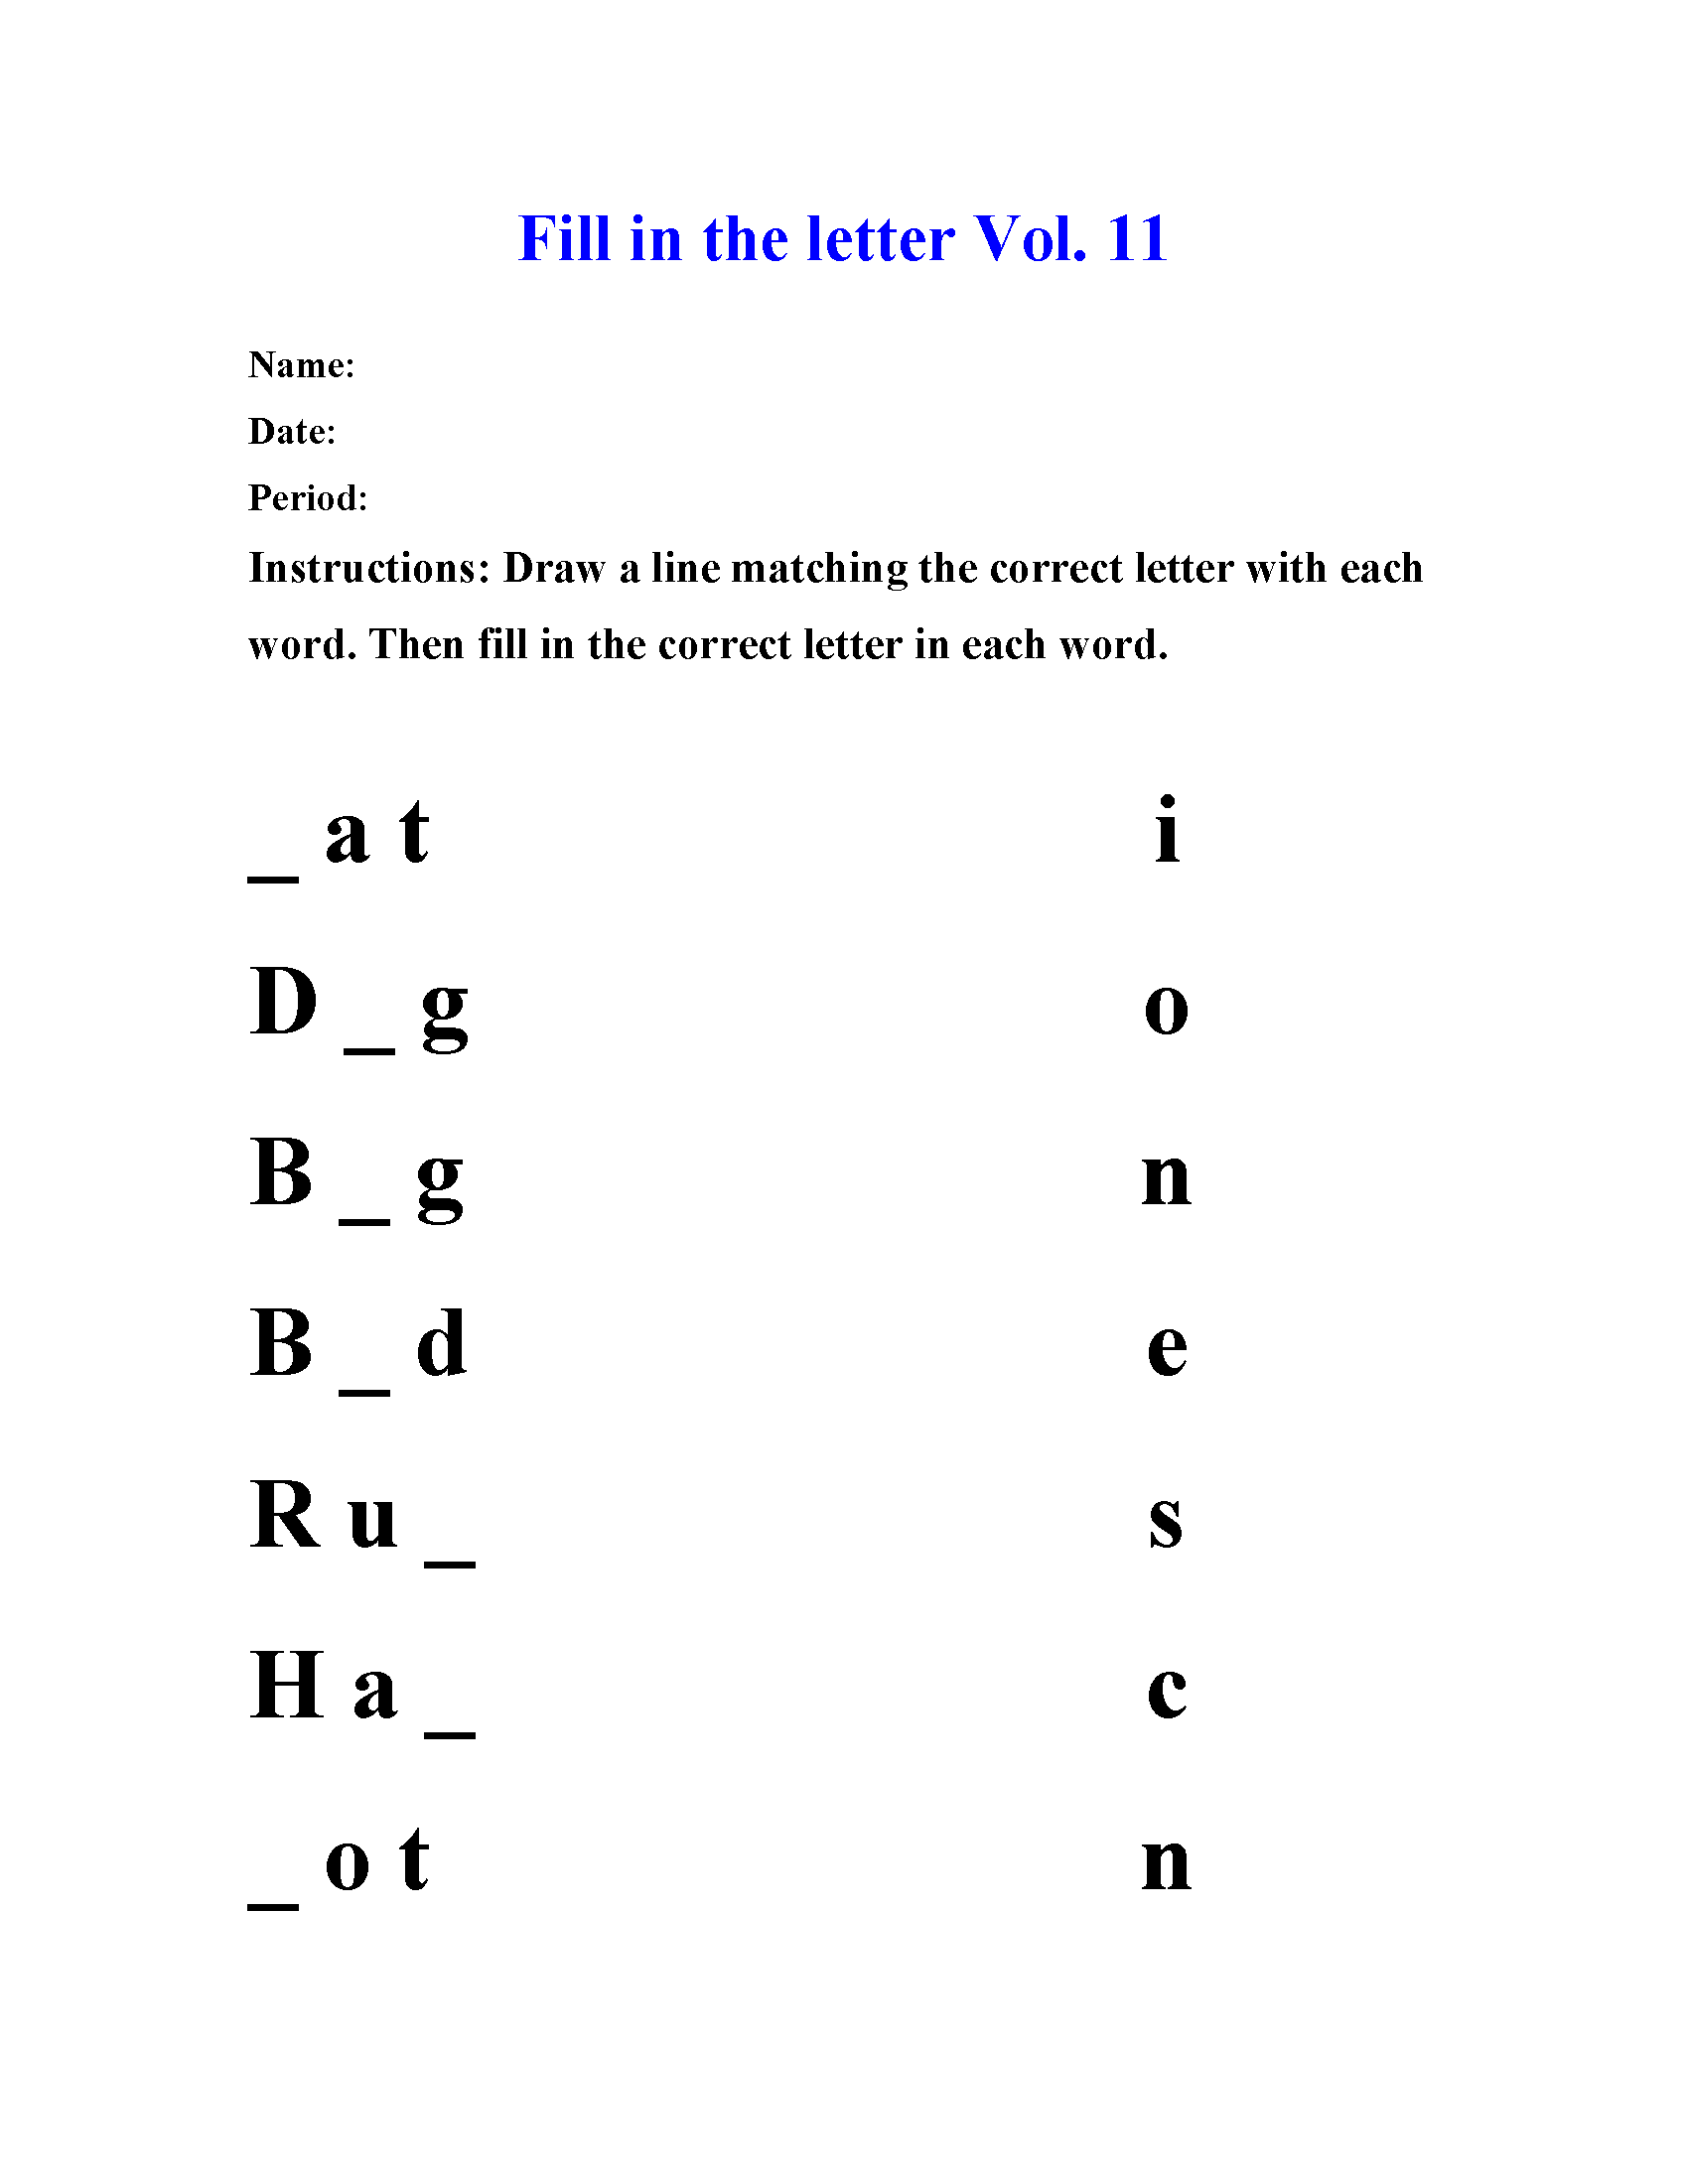 Fill in the letter Vol 11